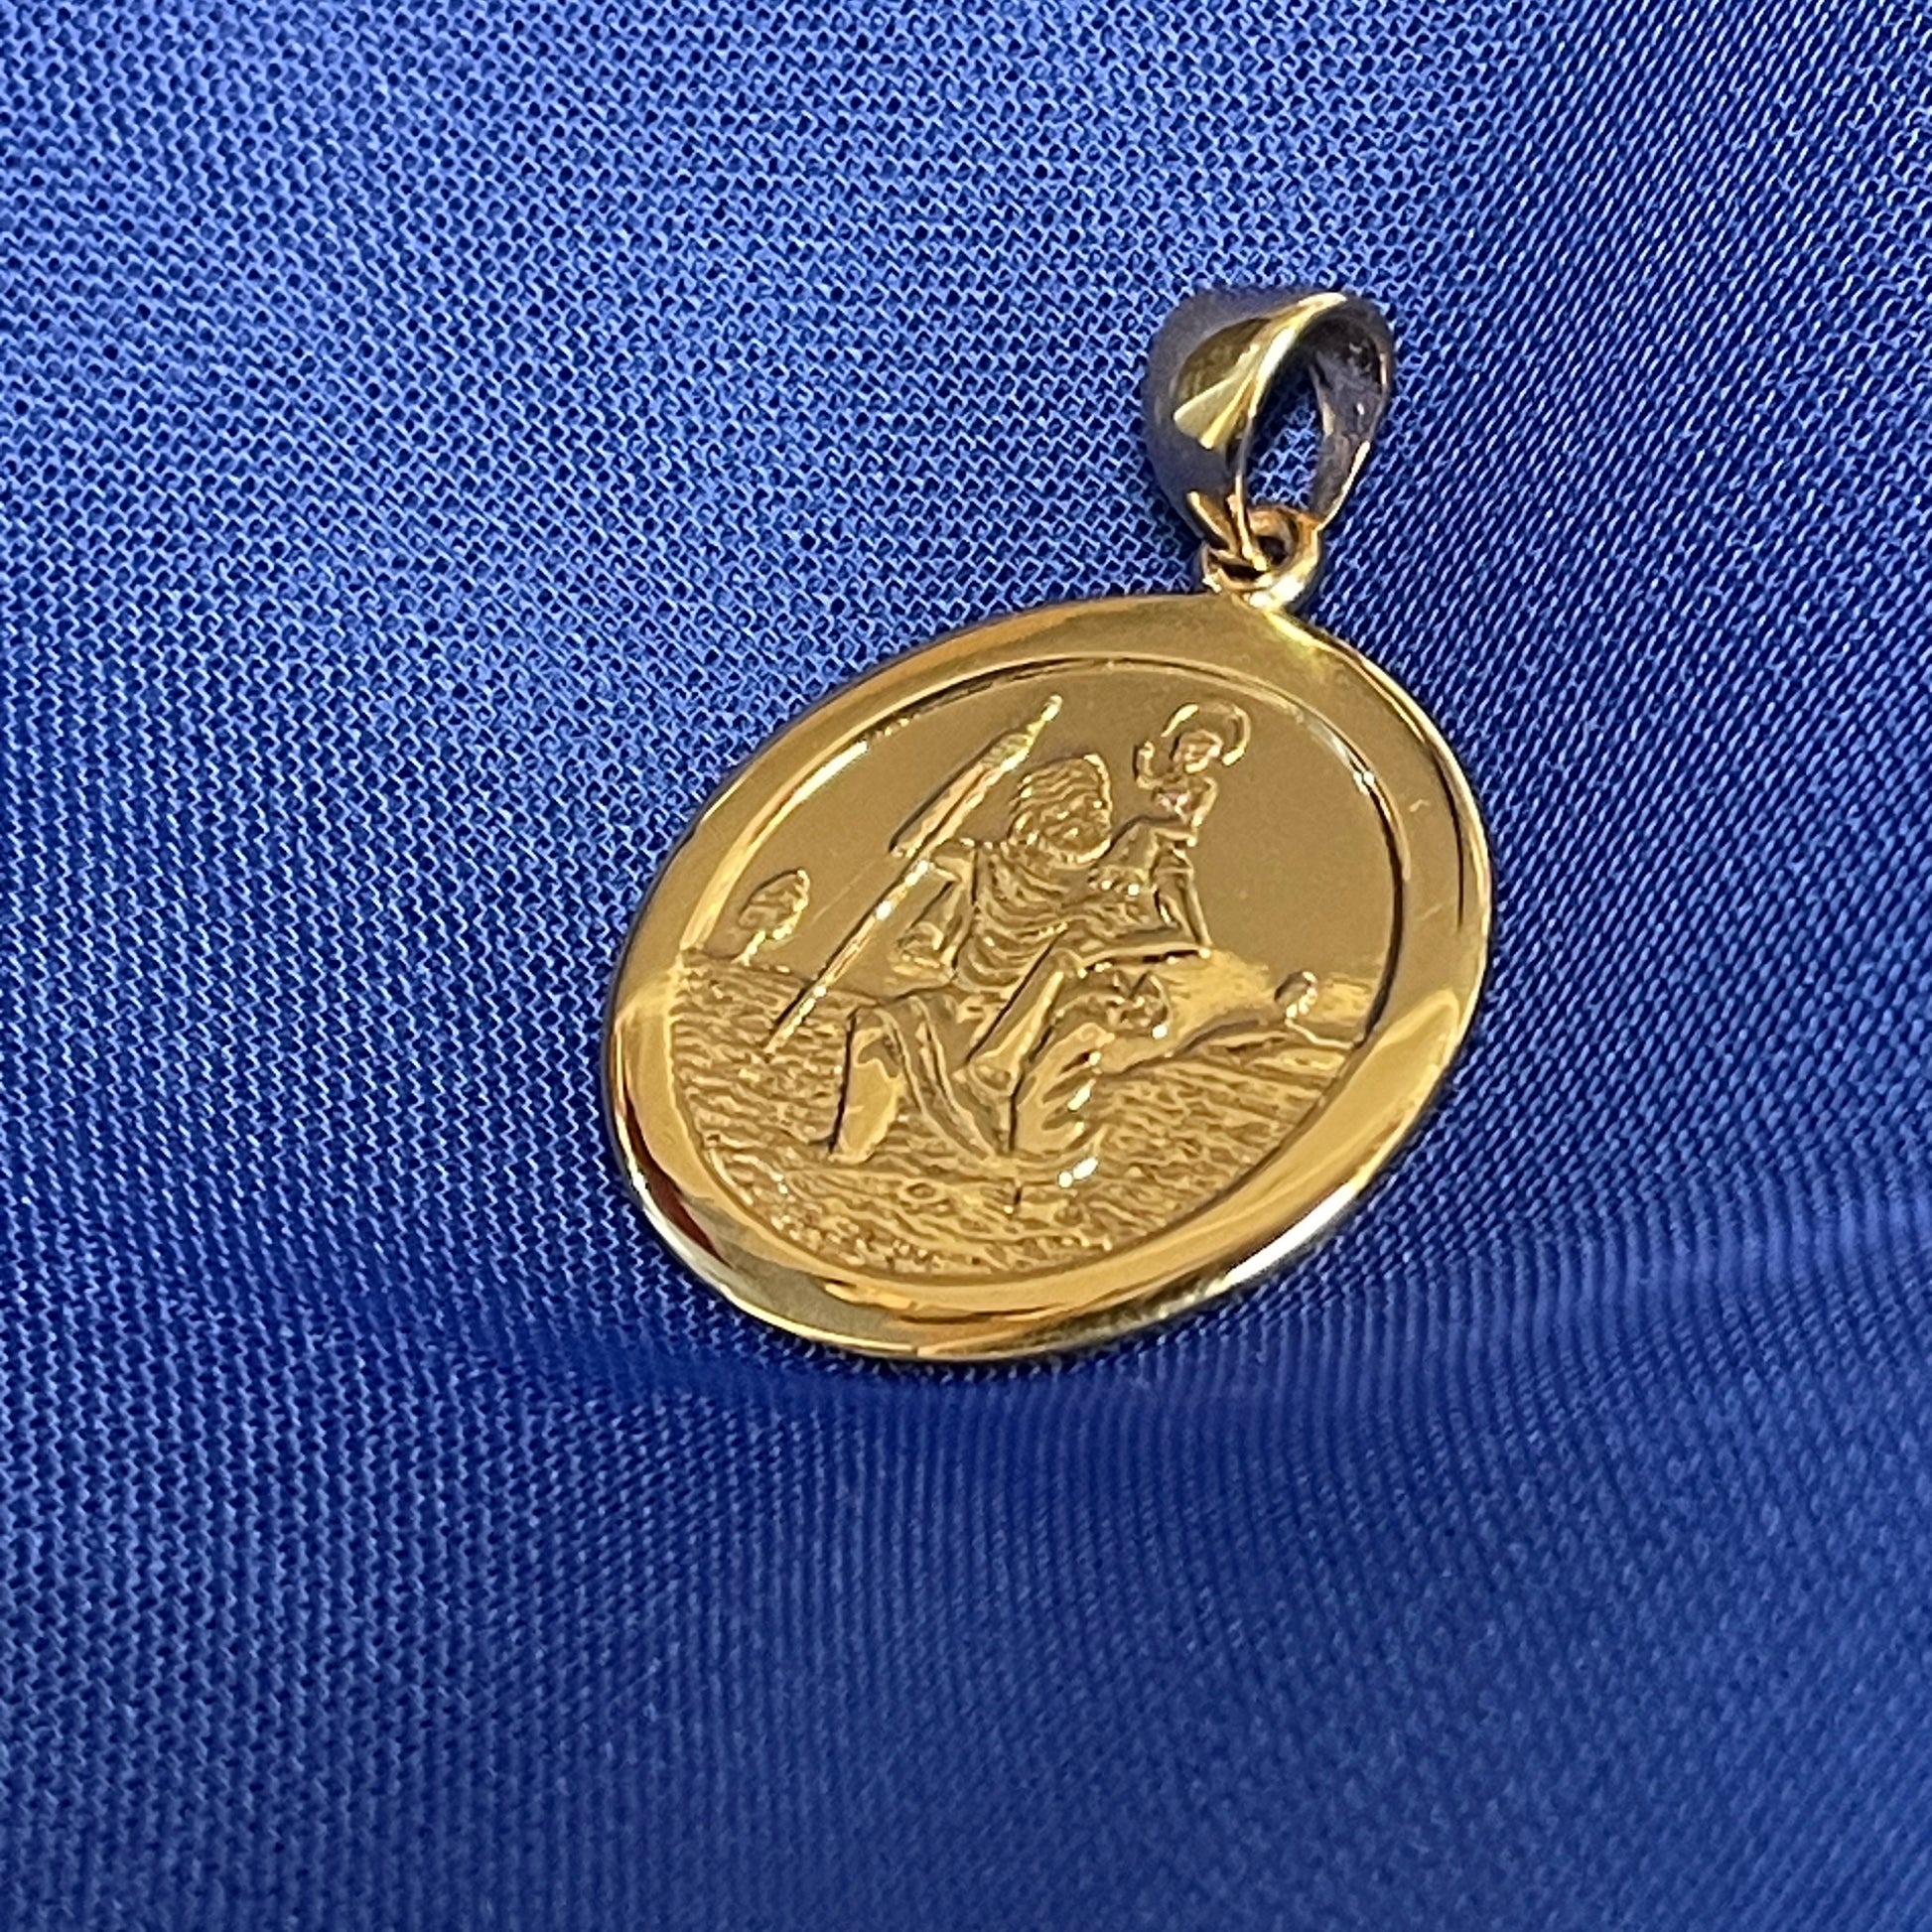 St. Christopher solid round 9 carat yellow gold 19 mm